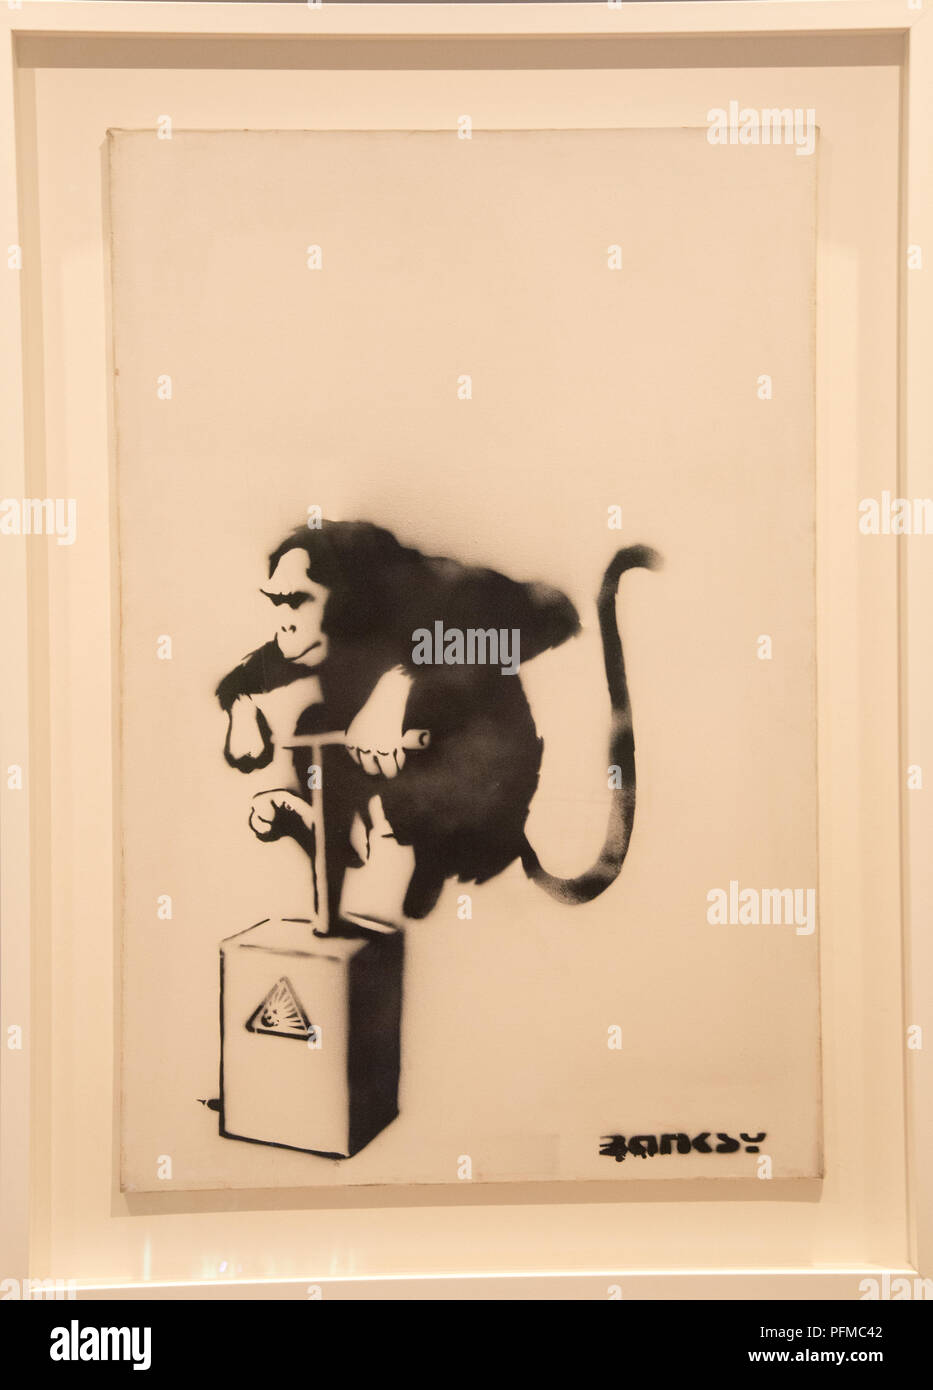 'Monkey detonator' from Banksy at exposition at MOCO museum in Amsterdam, Holland Stock Photo